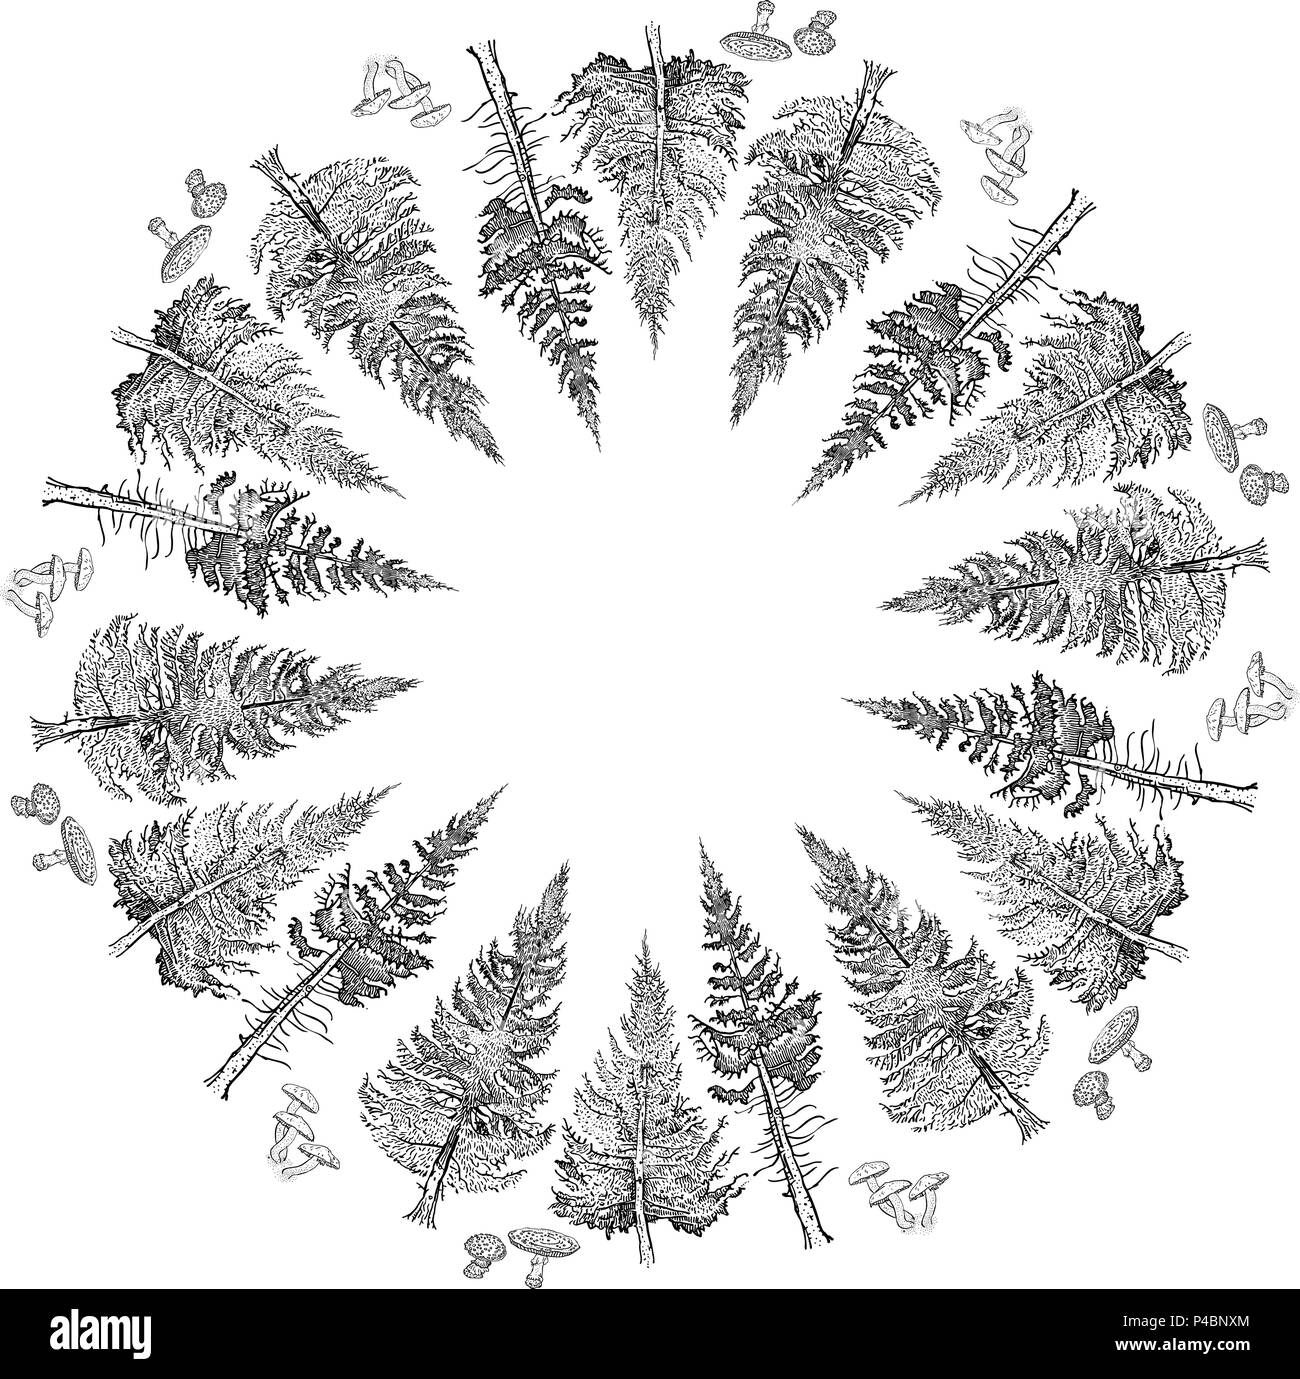 Forest round frame: fir tree, spruce, mushrooms. Wreath for invitation, greeting cards, pattern design, decoration, textile print, advertisement. Romantic, vintage, nature, magic, engraving style. Stock Vector